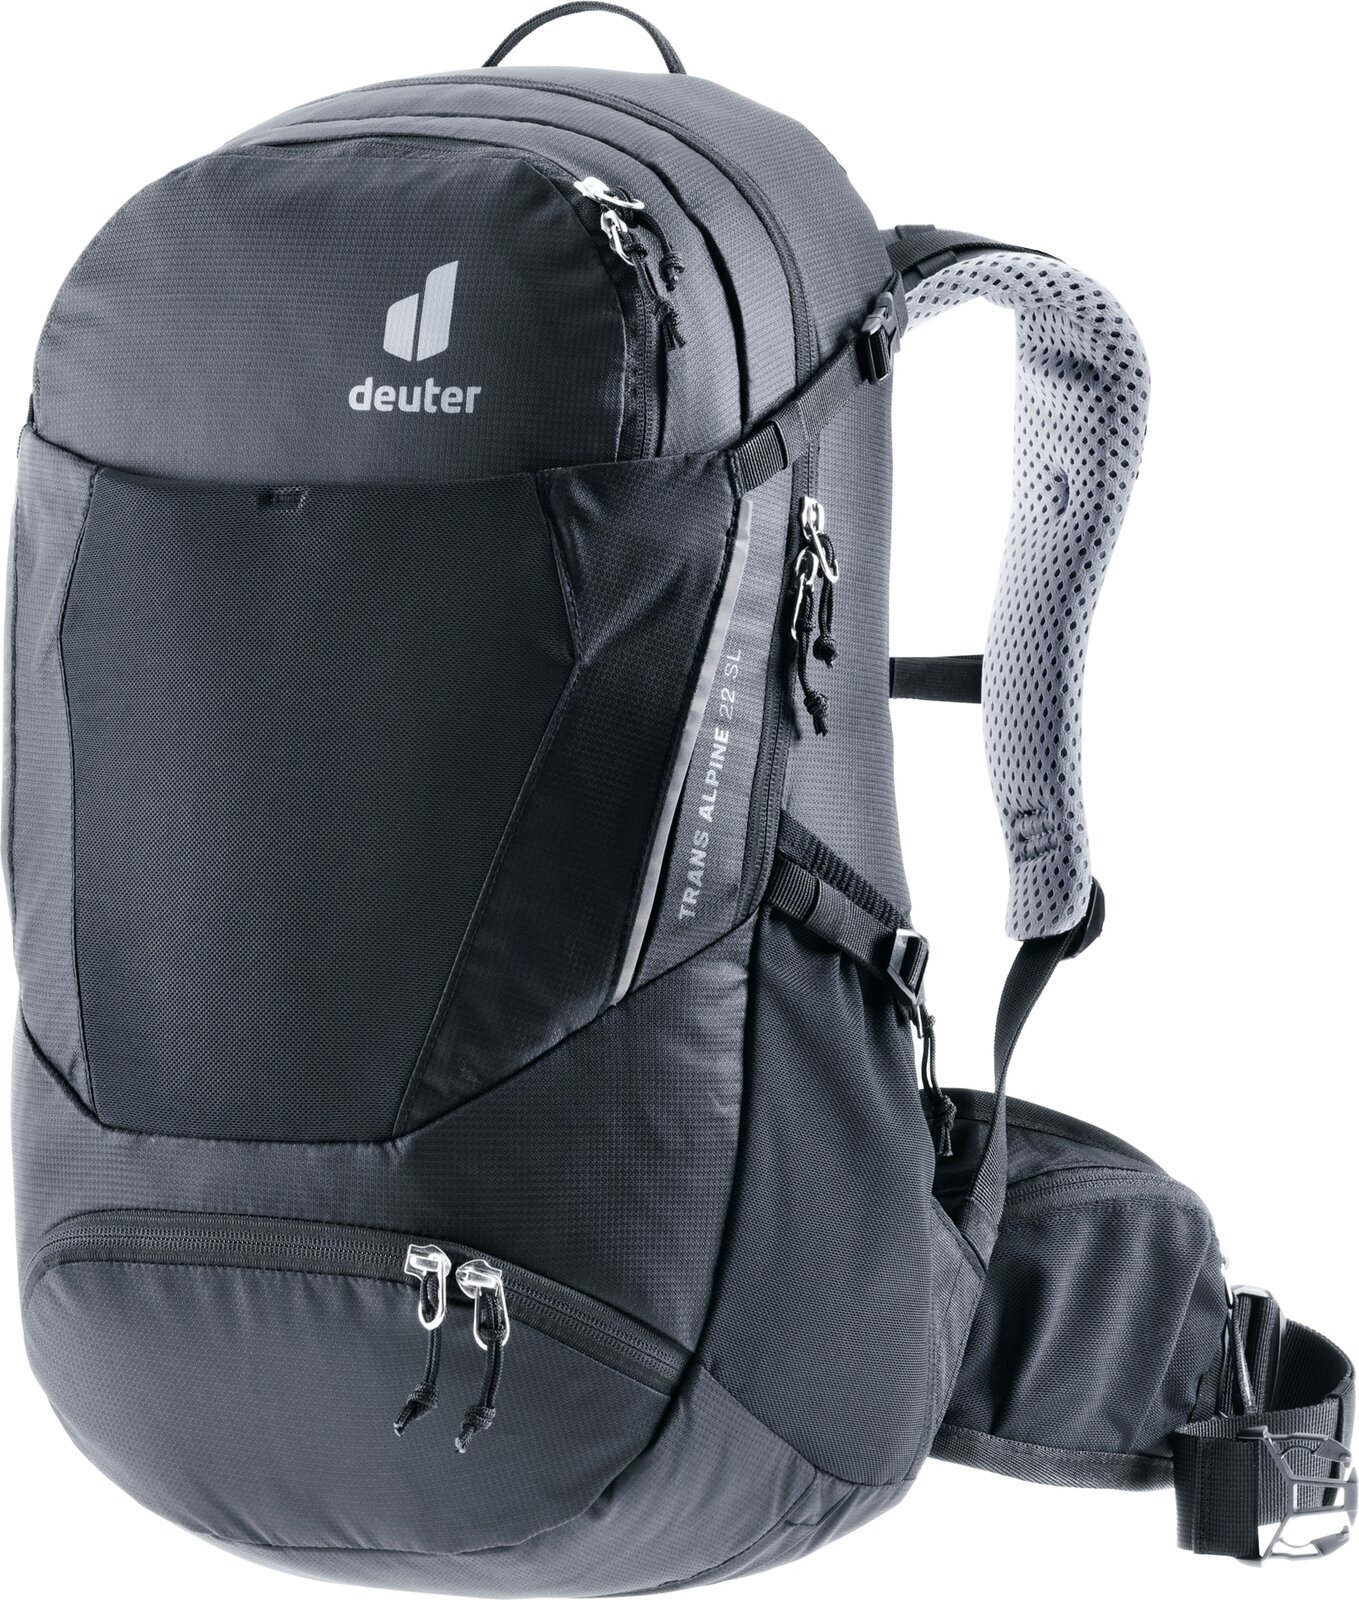 Cycling backpack and accessories Deuter Trans Alpine 22 SL Black Backpack